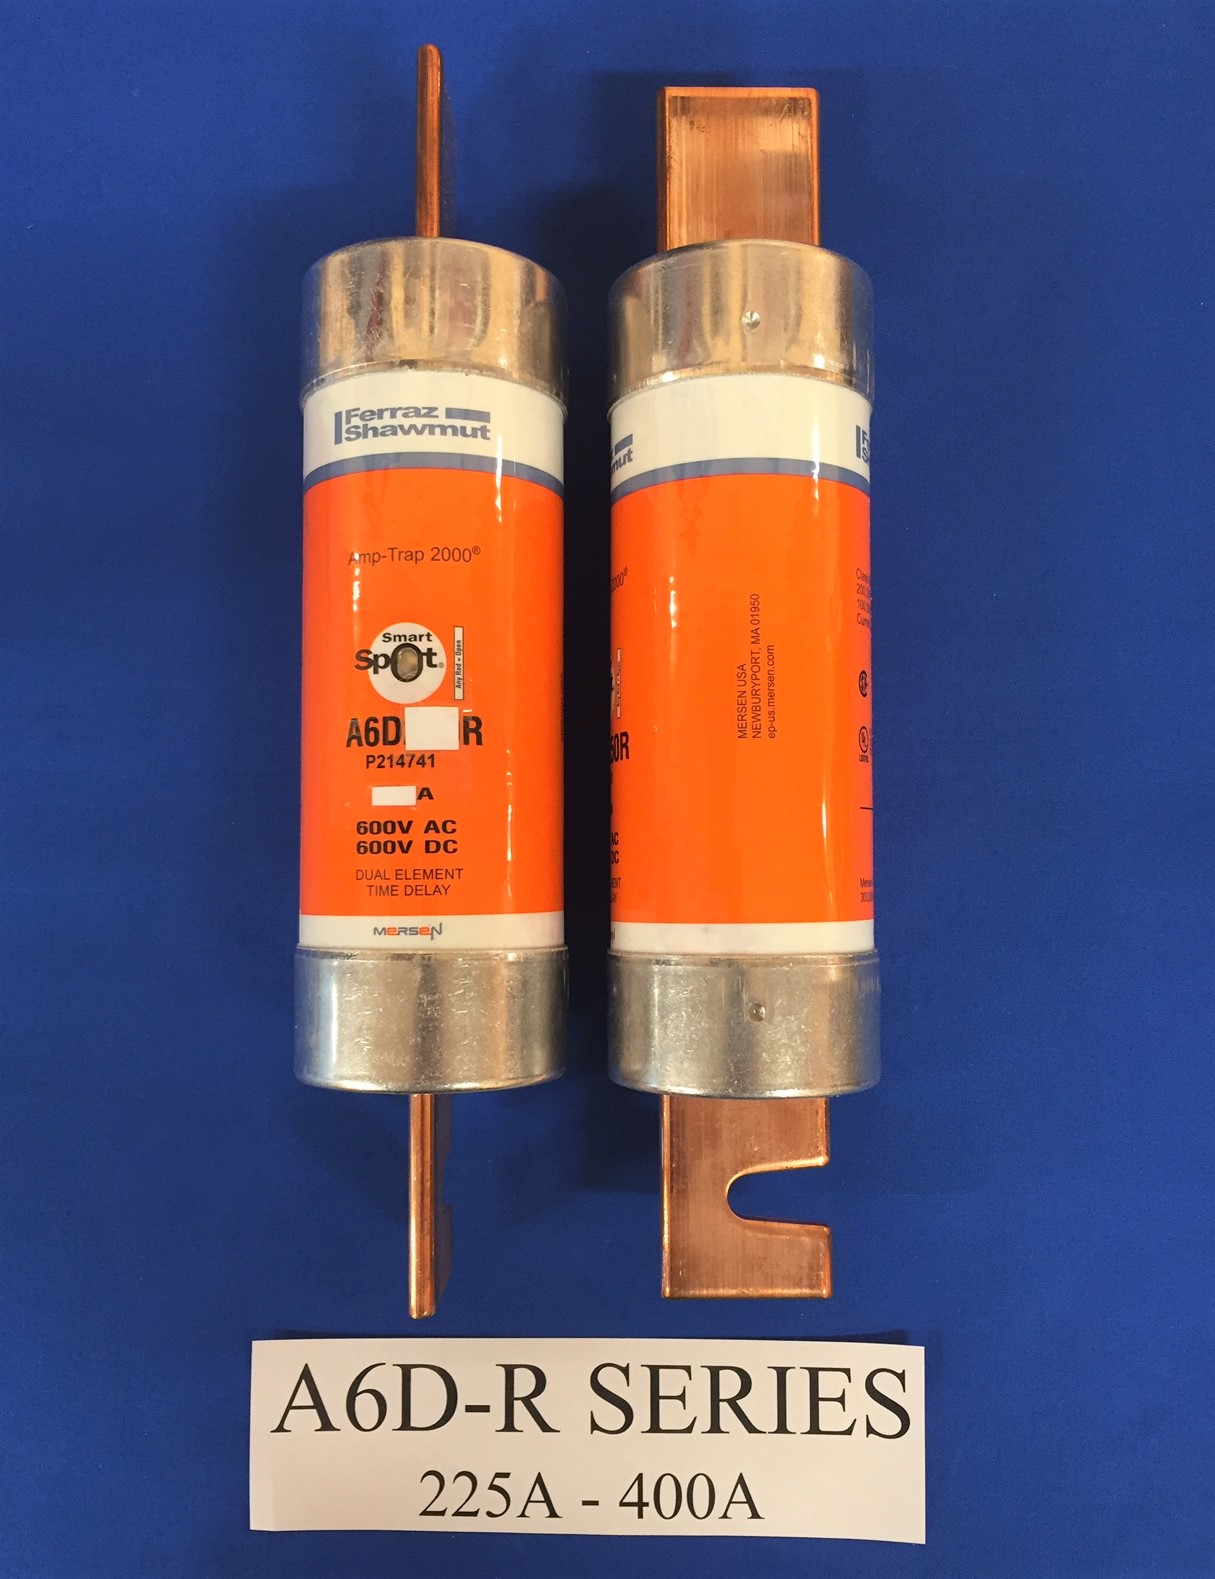 600VAC/DC 30 Ampere 200kA AC/100kA DC 13/16 Diameter x 5 Length Mersen A6D-R Amp-Trap 2000 Time-Delay/Class RK1 Fuse with Visual Open Fuse Indicator